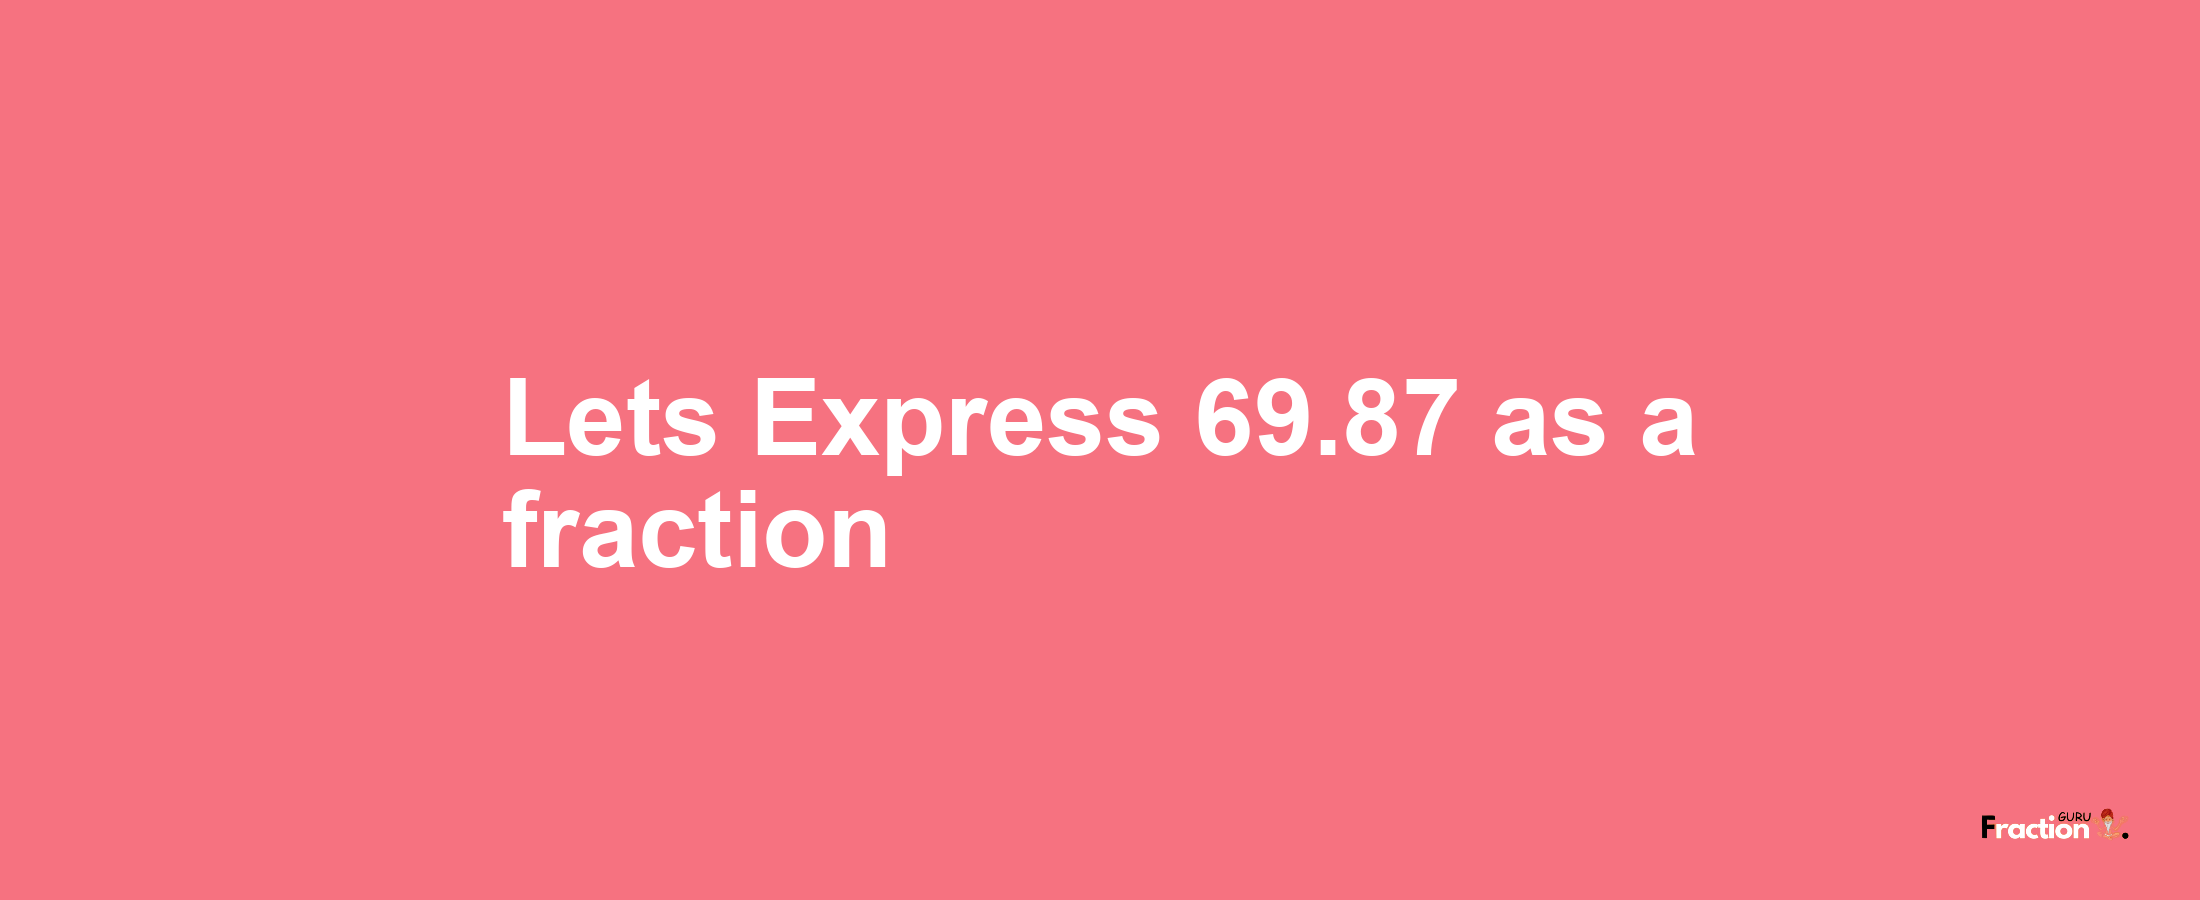 Lets Express 69.87 as afraction